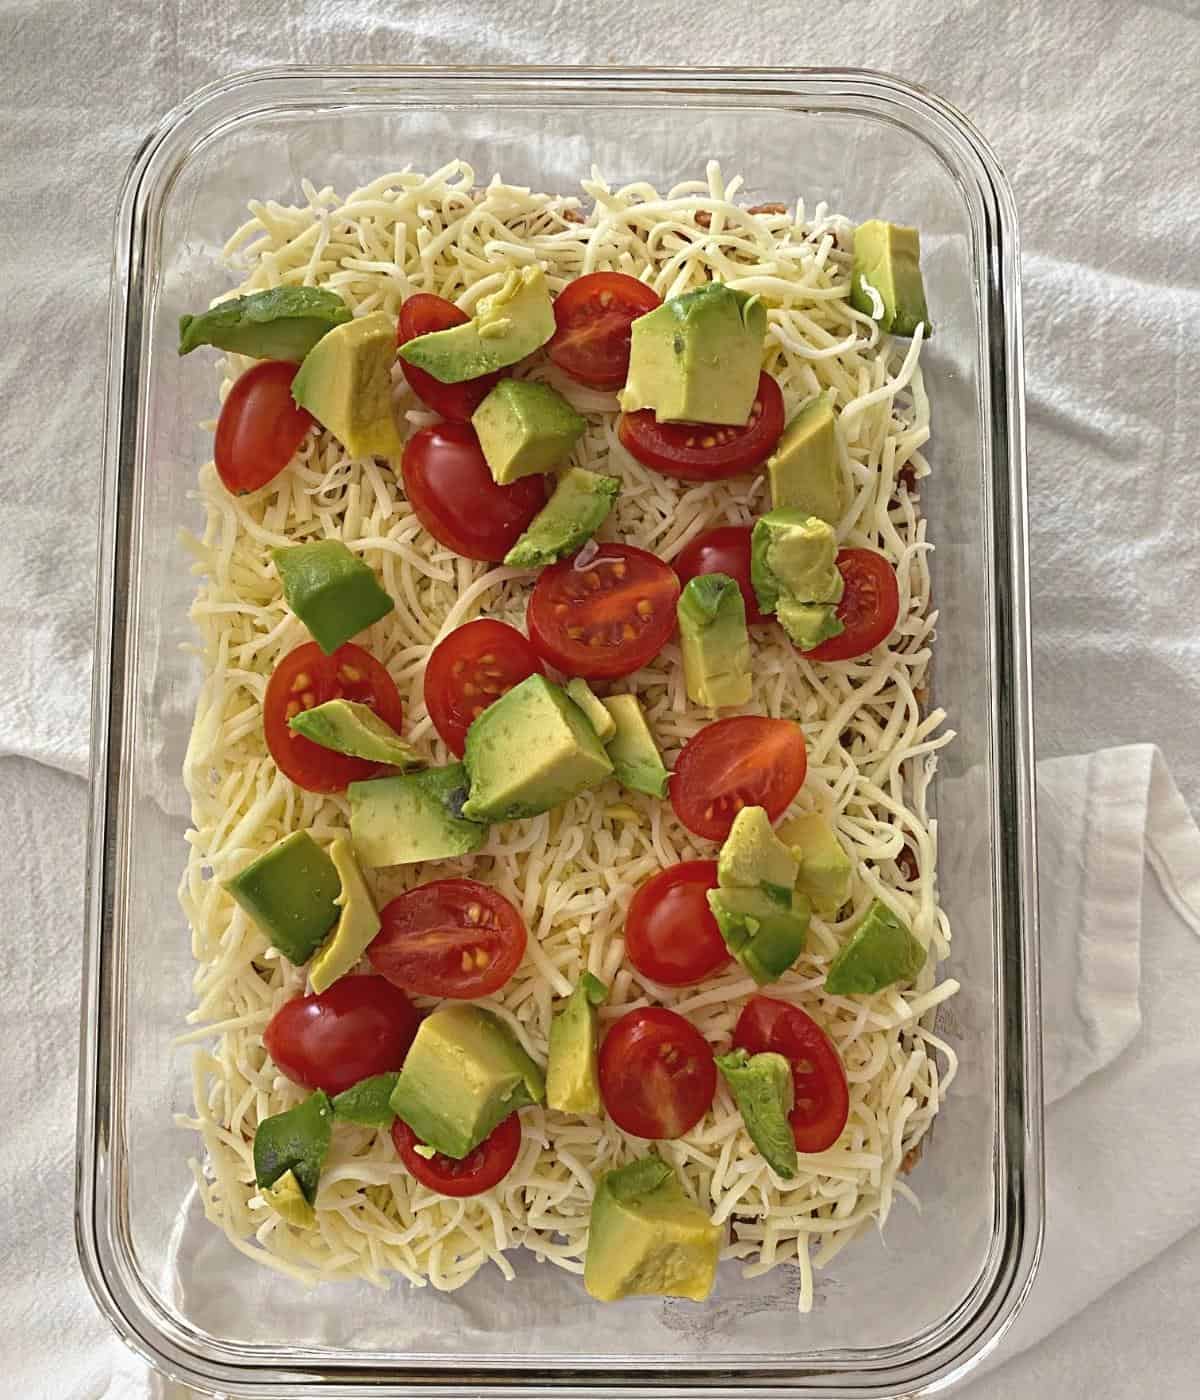 Diced tomatoes and diced avocado on top of layered bean dip